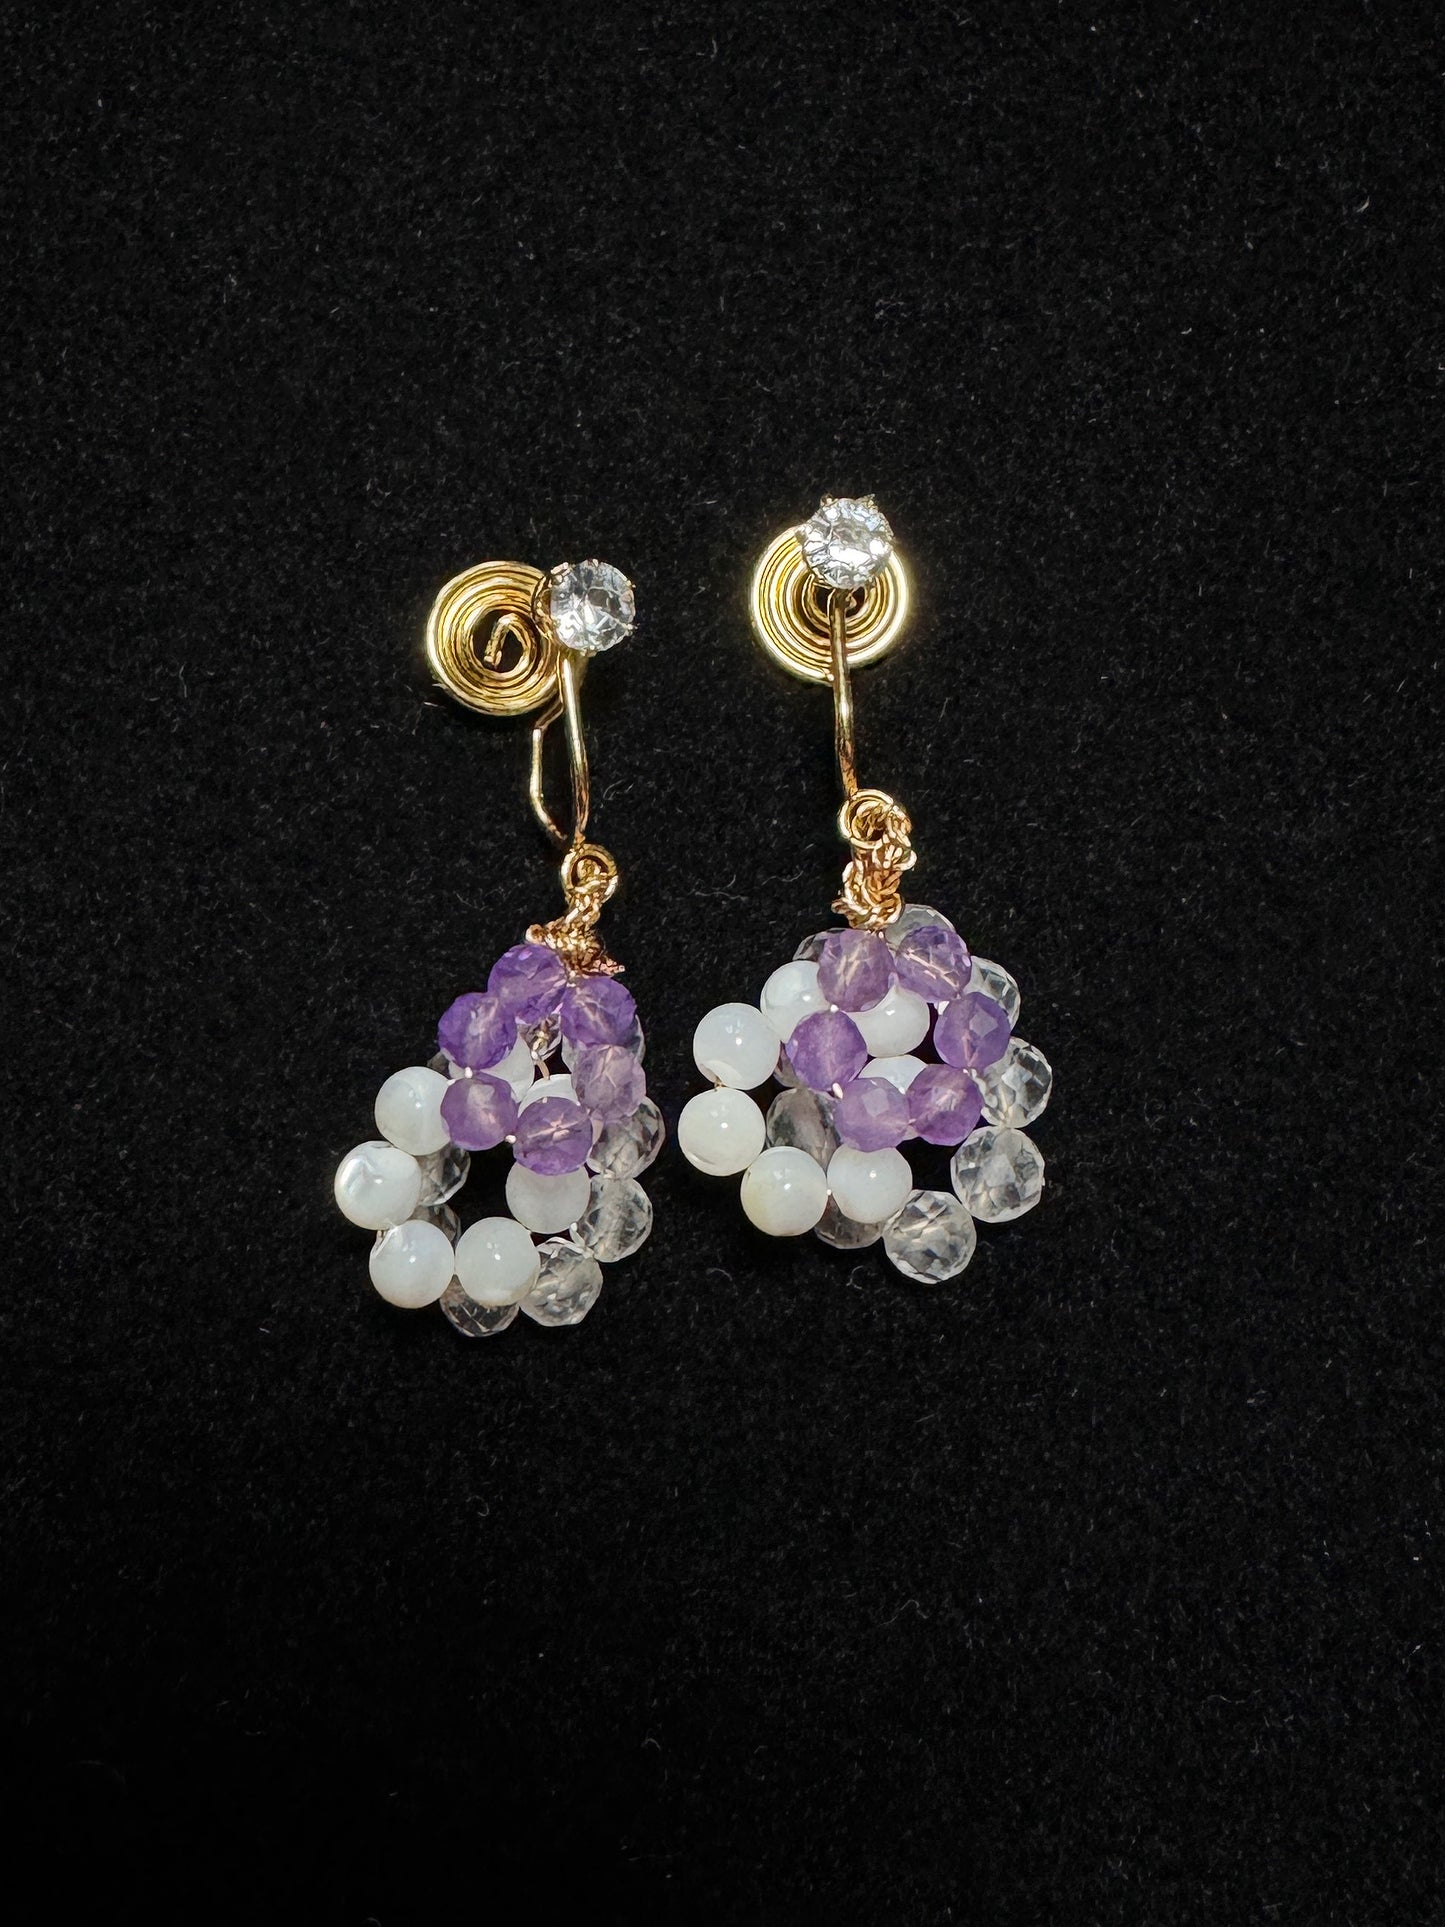 Handmade Three-Layer White Crystal, Amethyst, and Freshwater Pearl Ear Clips